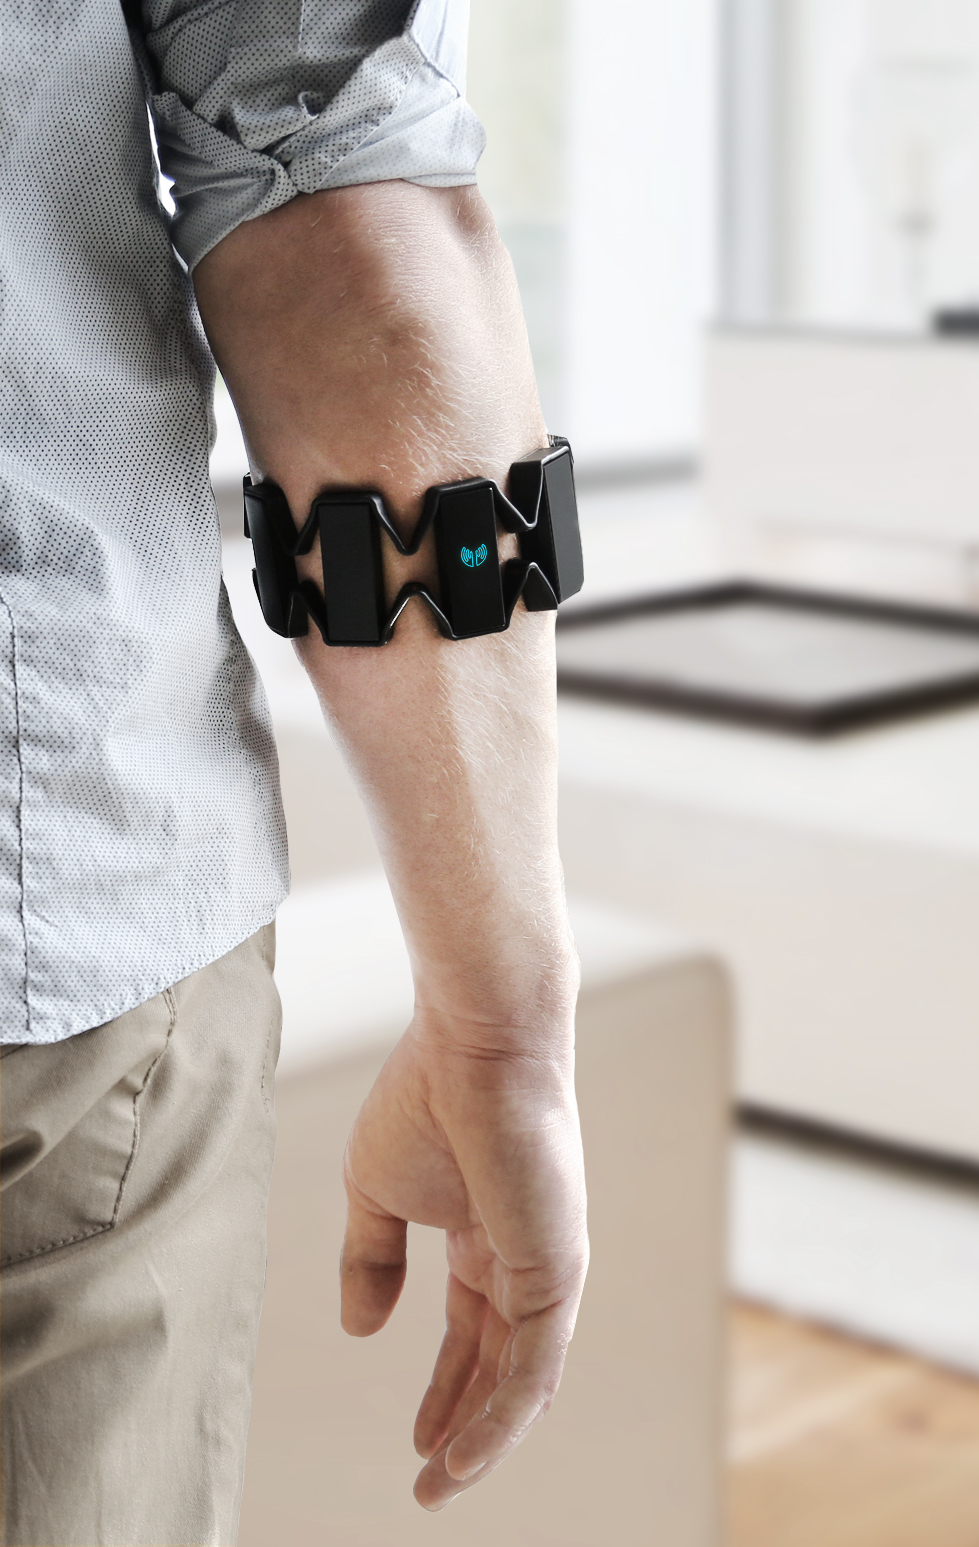 stortbui collegegeld voering Thalmic Shows Off The Final Design For The Myo Gesture Control Armband |  TechCrunch